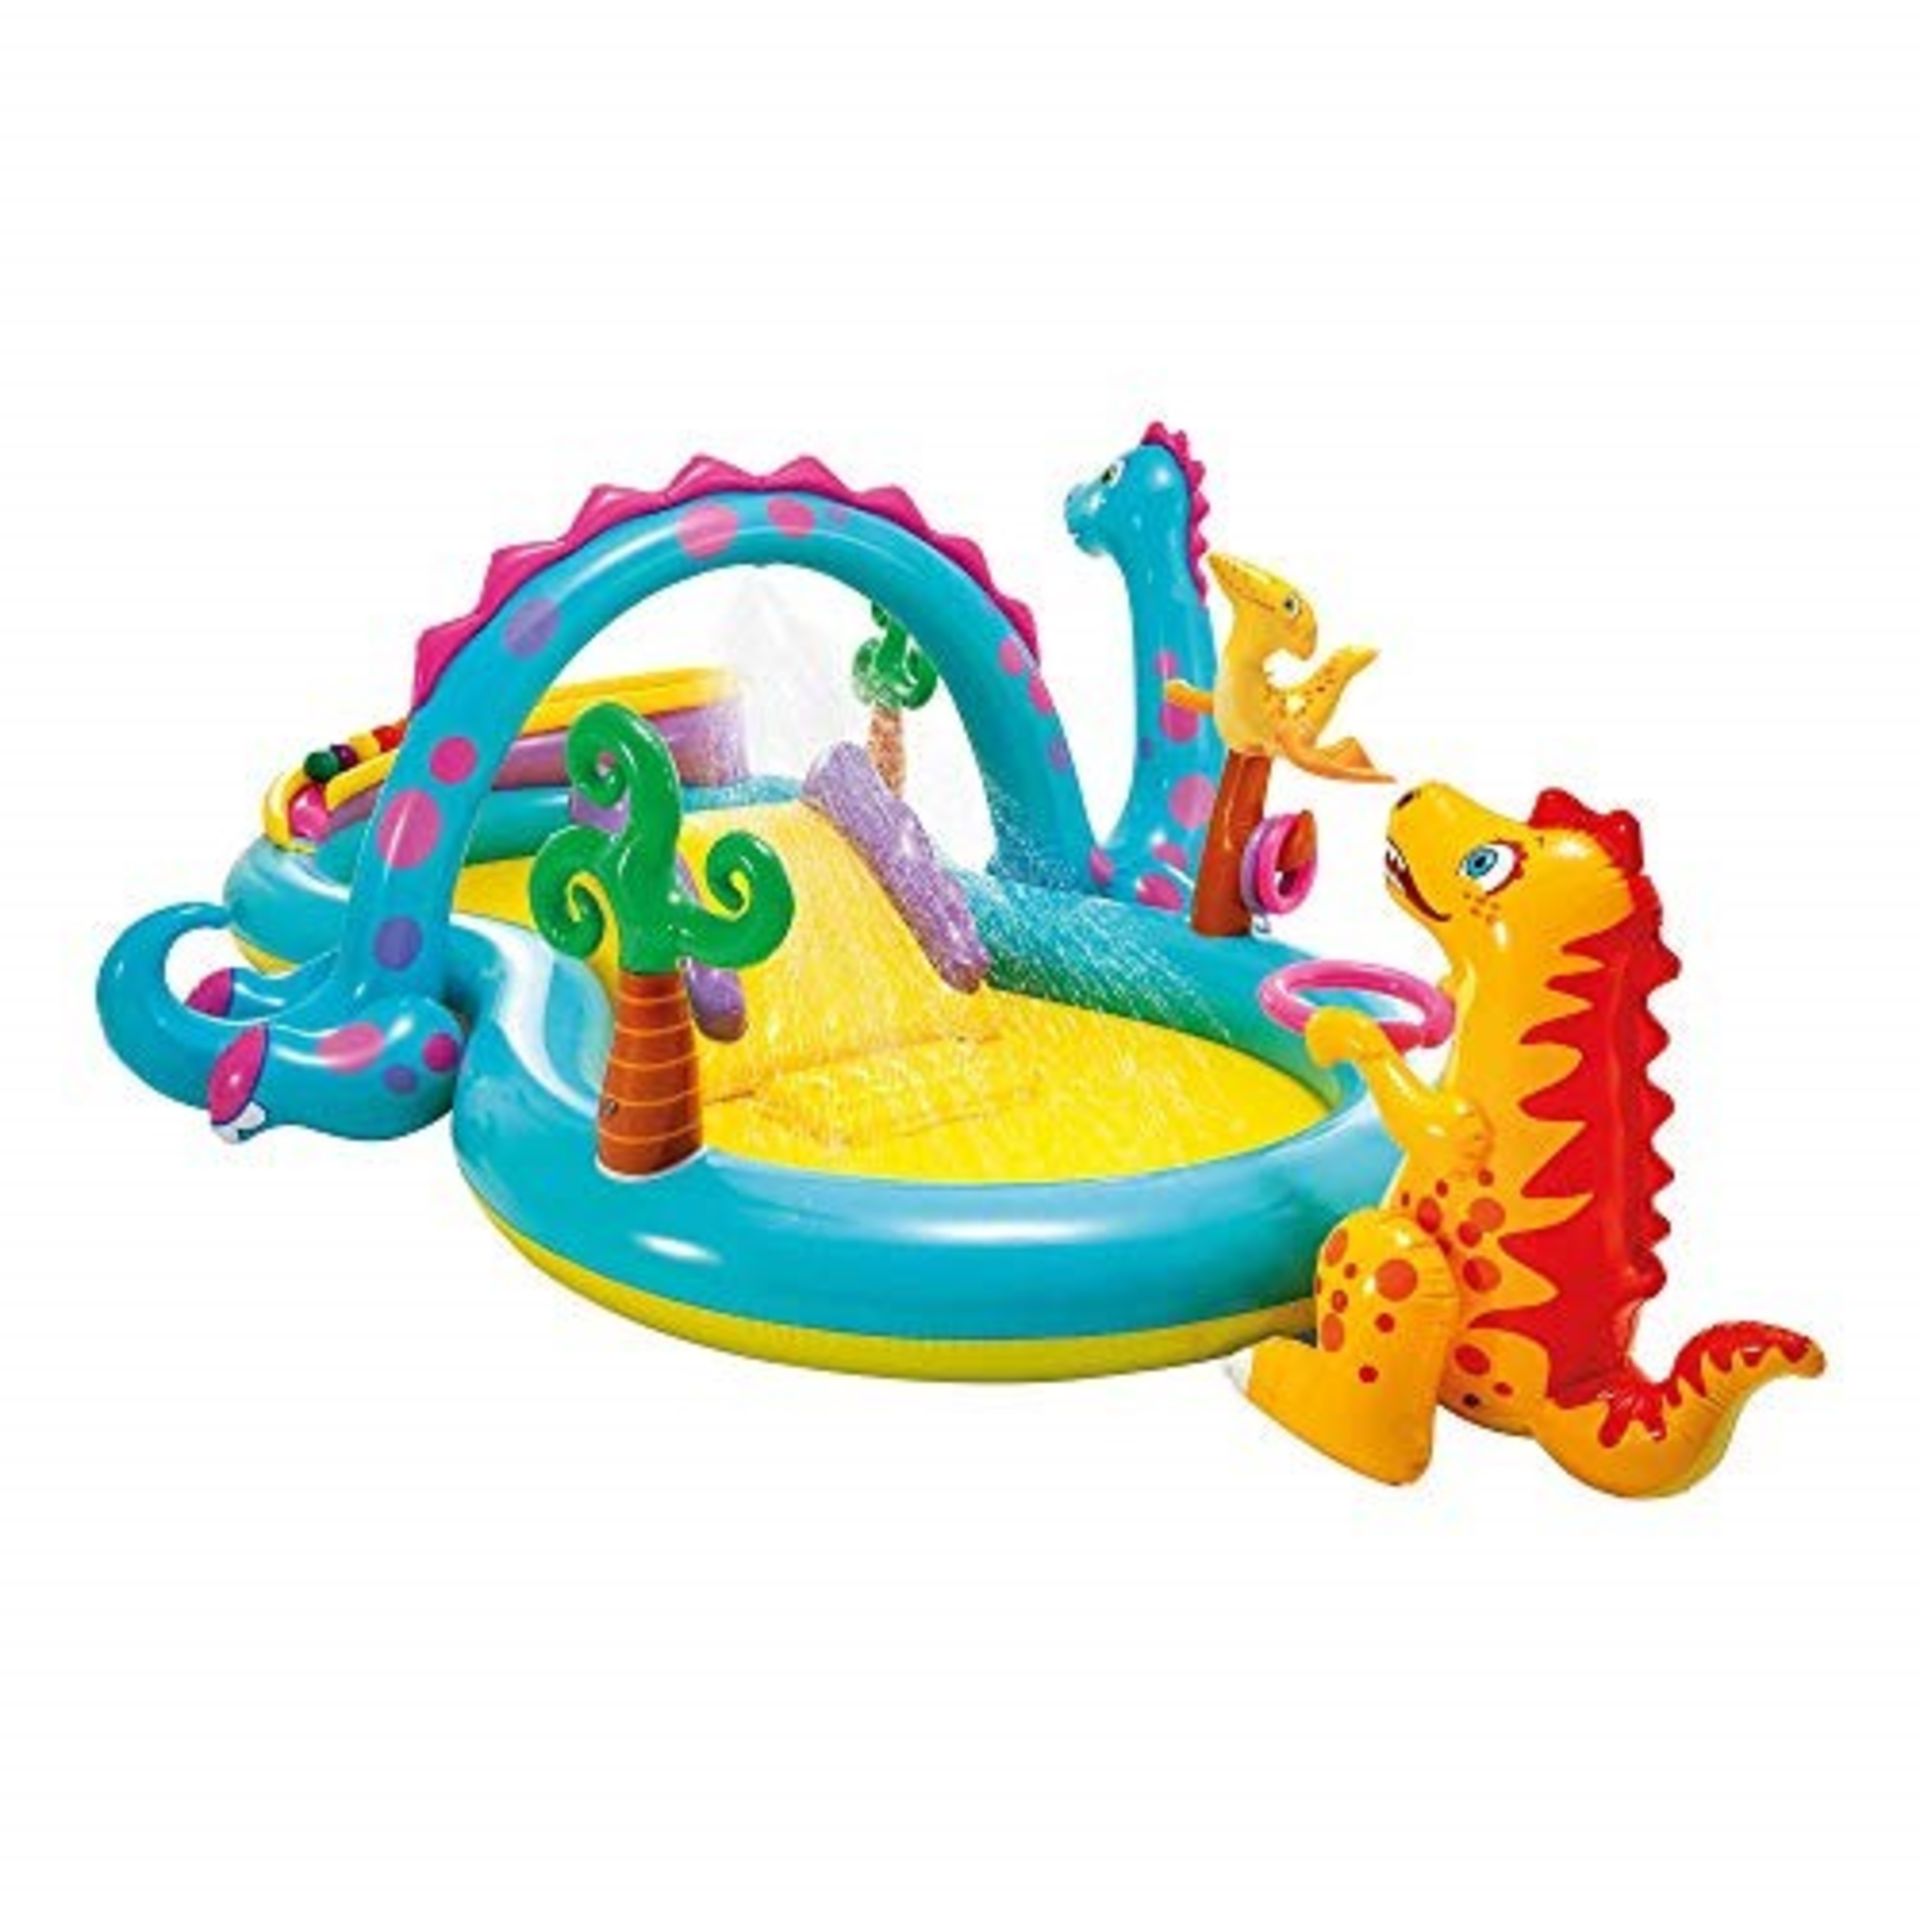 Intex-57135NP Dinoland Play Center-Inflatable water play center, assorted model (with